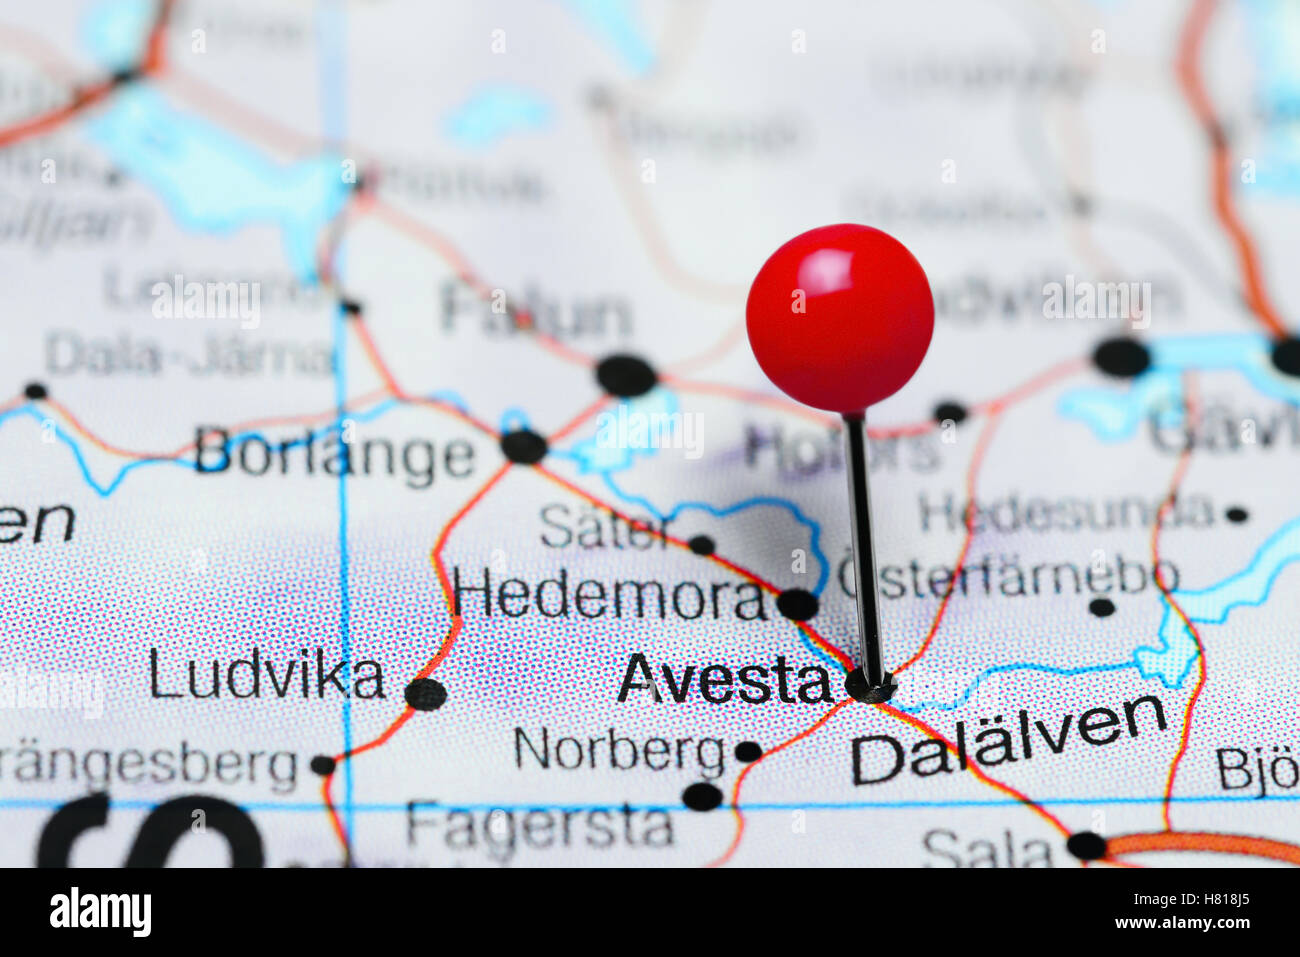 Avesta pinned on a map of Sweden Stock Photo